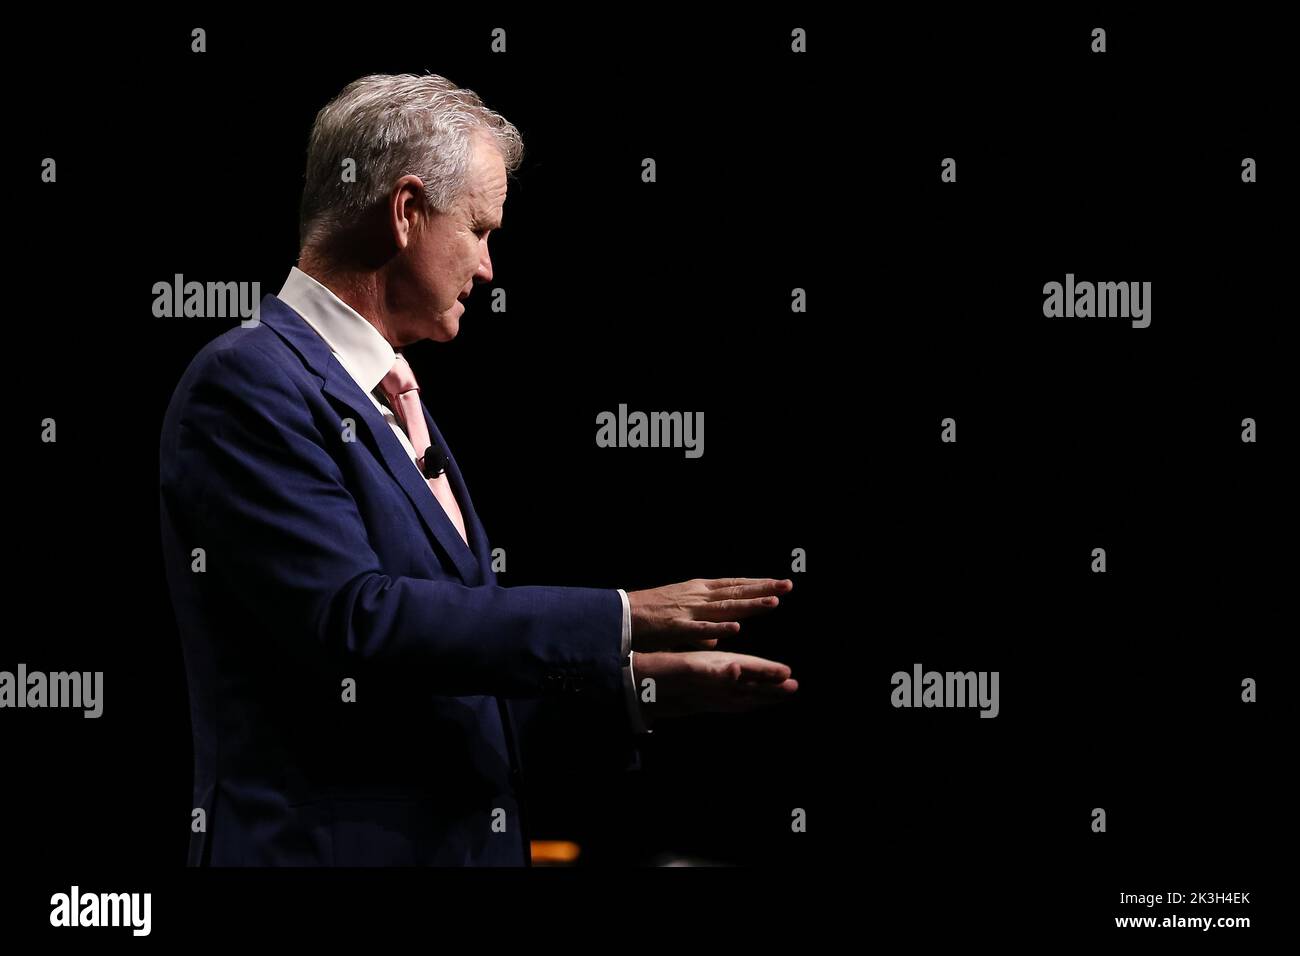 Melbourne, Australia, 26 September, 2022. Well known commentator Ross Cameron opens the night during An Evening With Nigel Farage at The Melbourne Convention and Exhibition Centre on September 26, 2022 in Melbourne, Australia. Credit: Dave Hewison/Speed Media/Alamy Live News Stock Photo